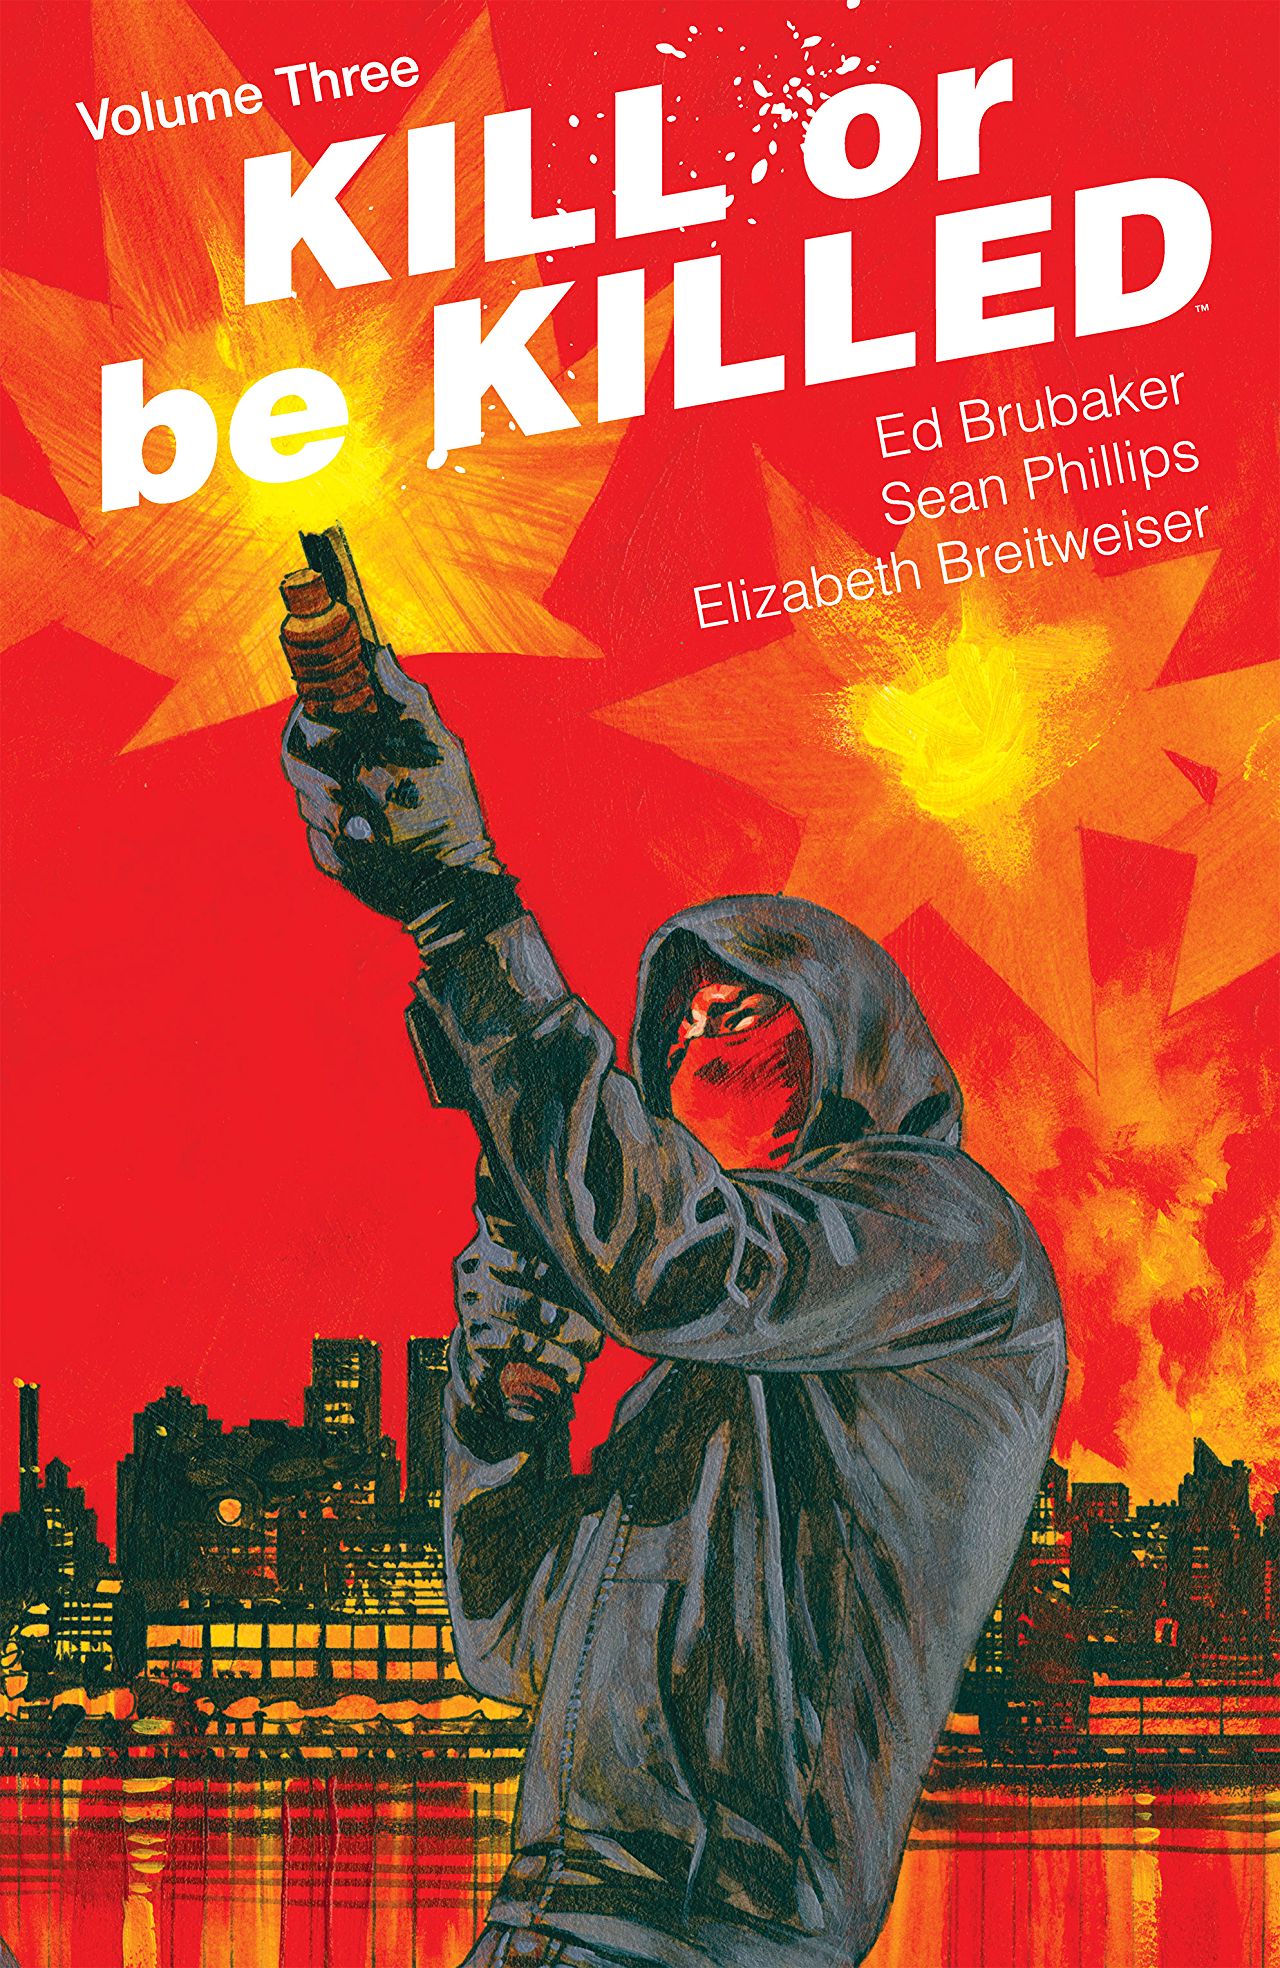 'Kill or be Killed Vol. 3' is less about vigilantism than it is about internal conflict